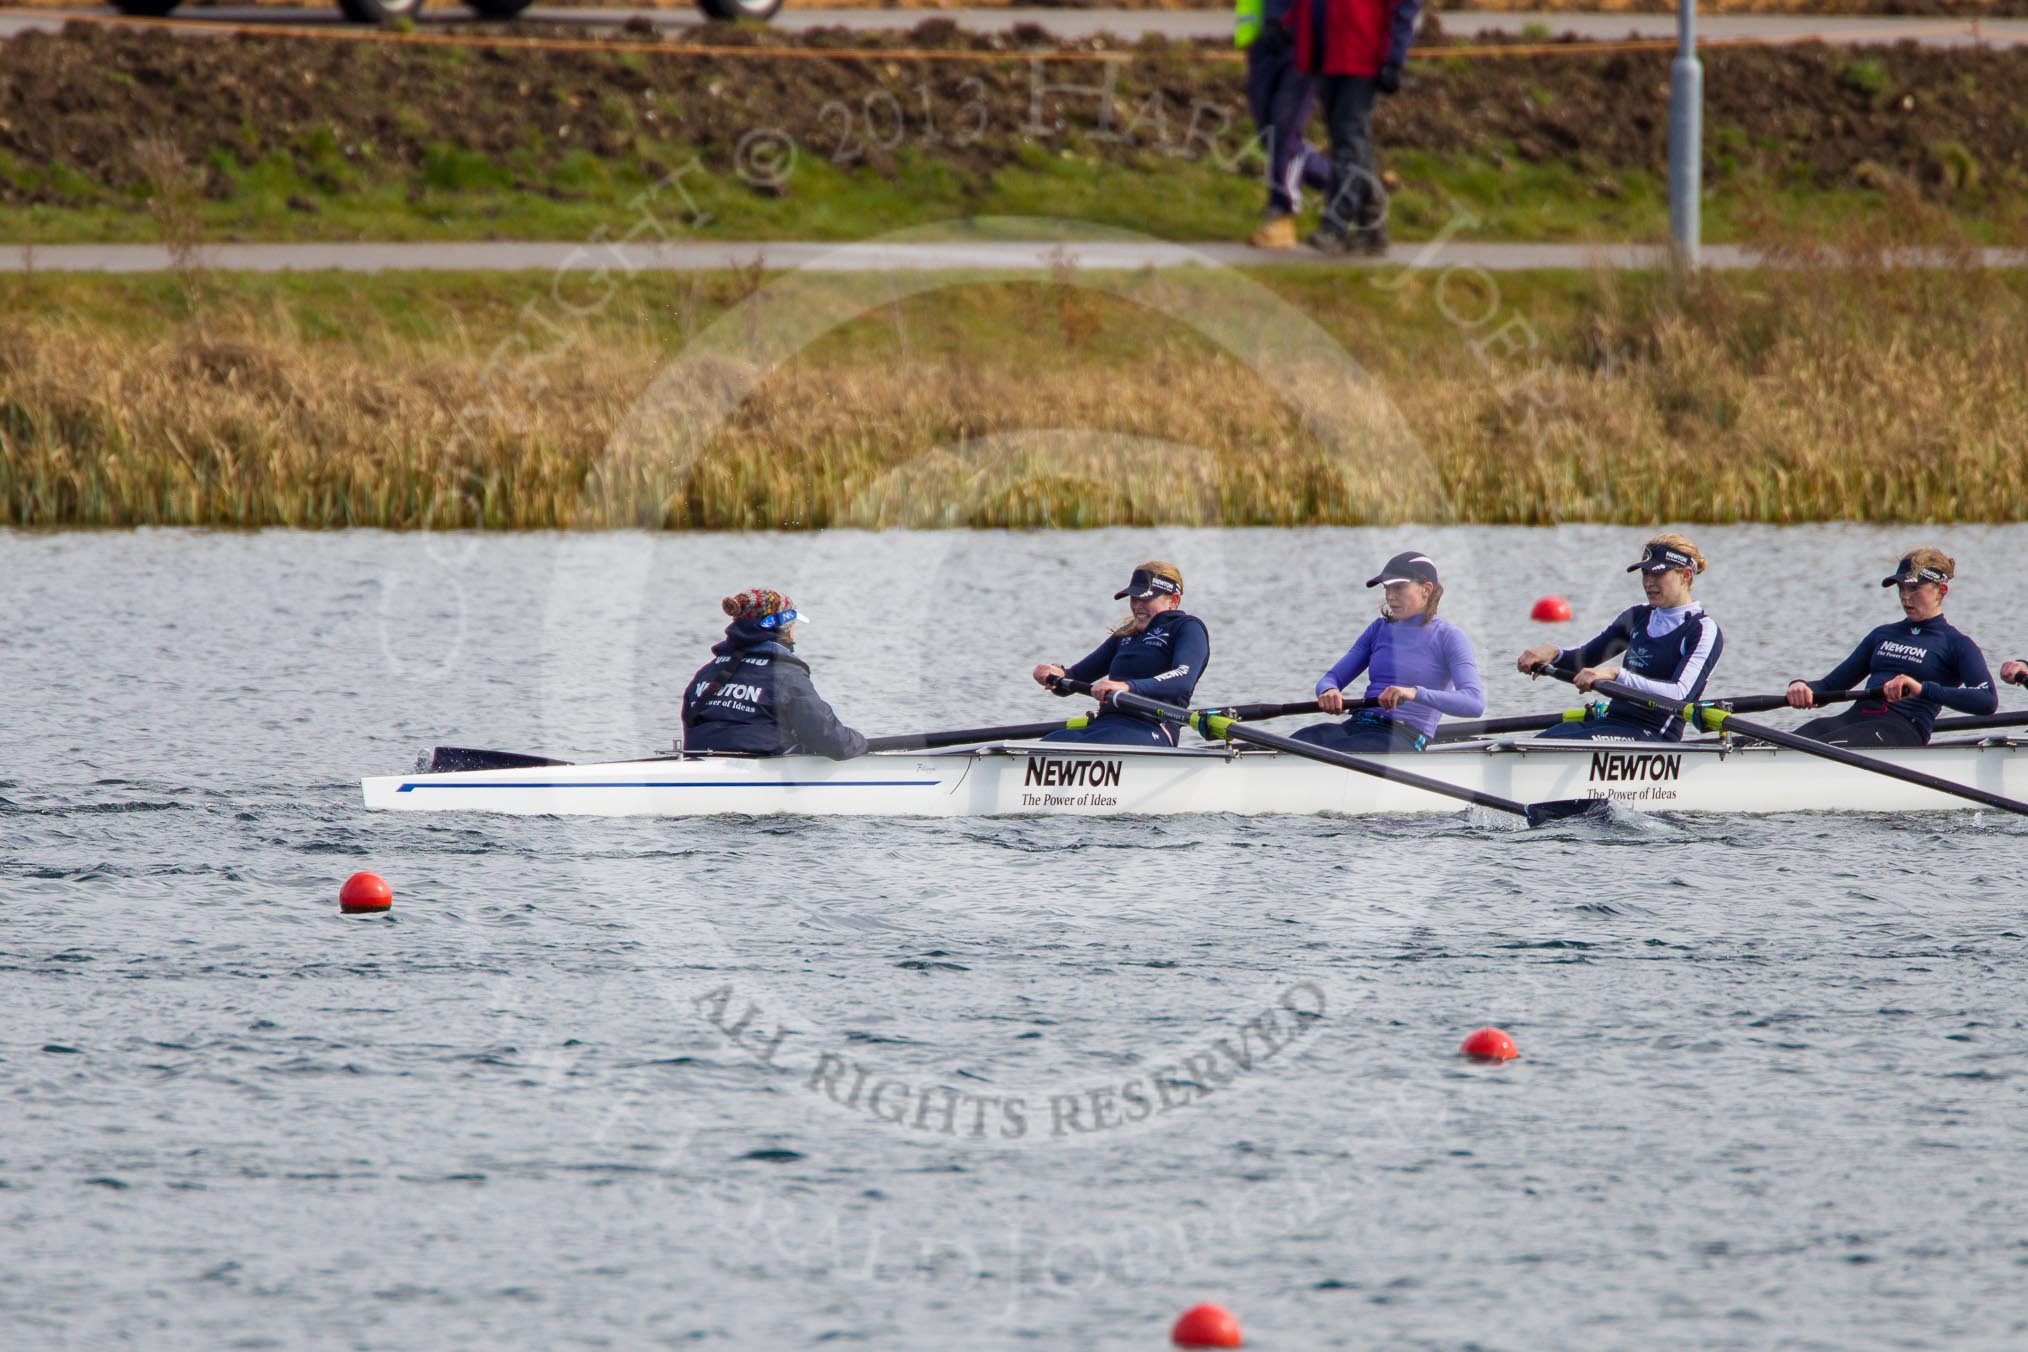 The Boat Race season 2013 - fixture OUWBC vs Olympians: In the Oxford (OUWBC) reserve boat Osiris cox Sophie Shawdon, stroke Emily Chittock, 7 Annika Bruger, 6 Caitlin Goss and 5 Rachel Purkess..
Dorney Lake,
Dorney, Windsor,
Buckinghamshire,
United Kingdom,
on 16 March 2013 at 12:17, image #230